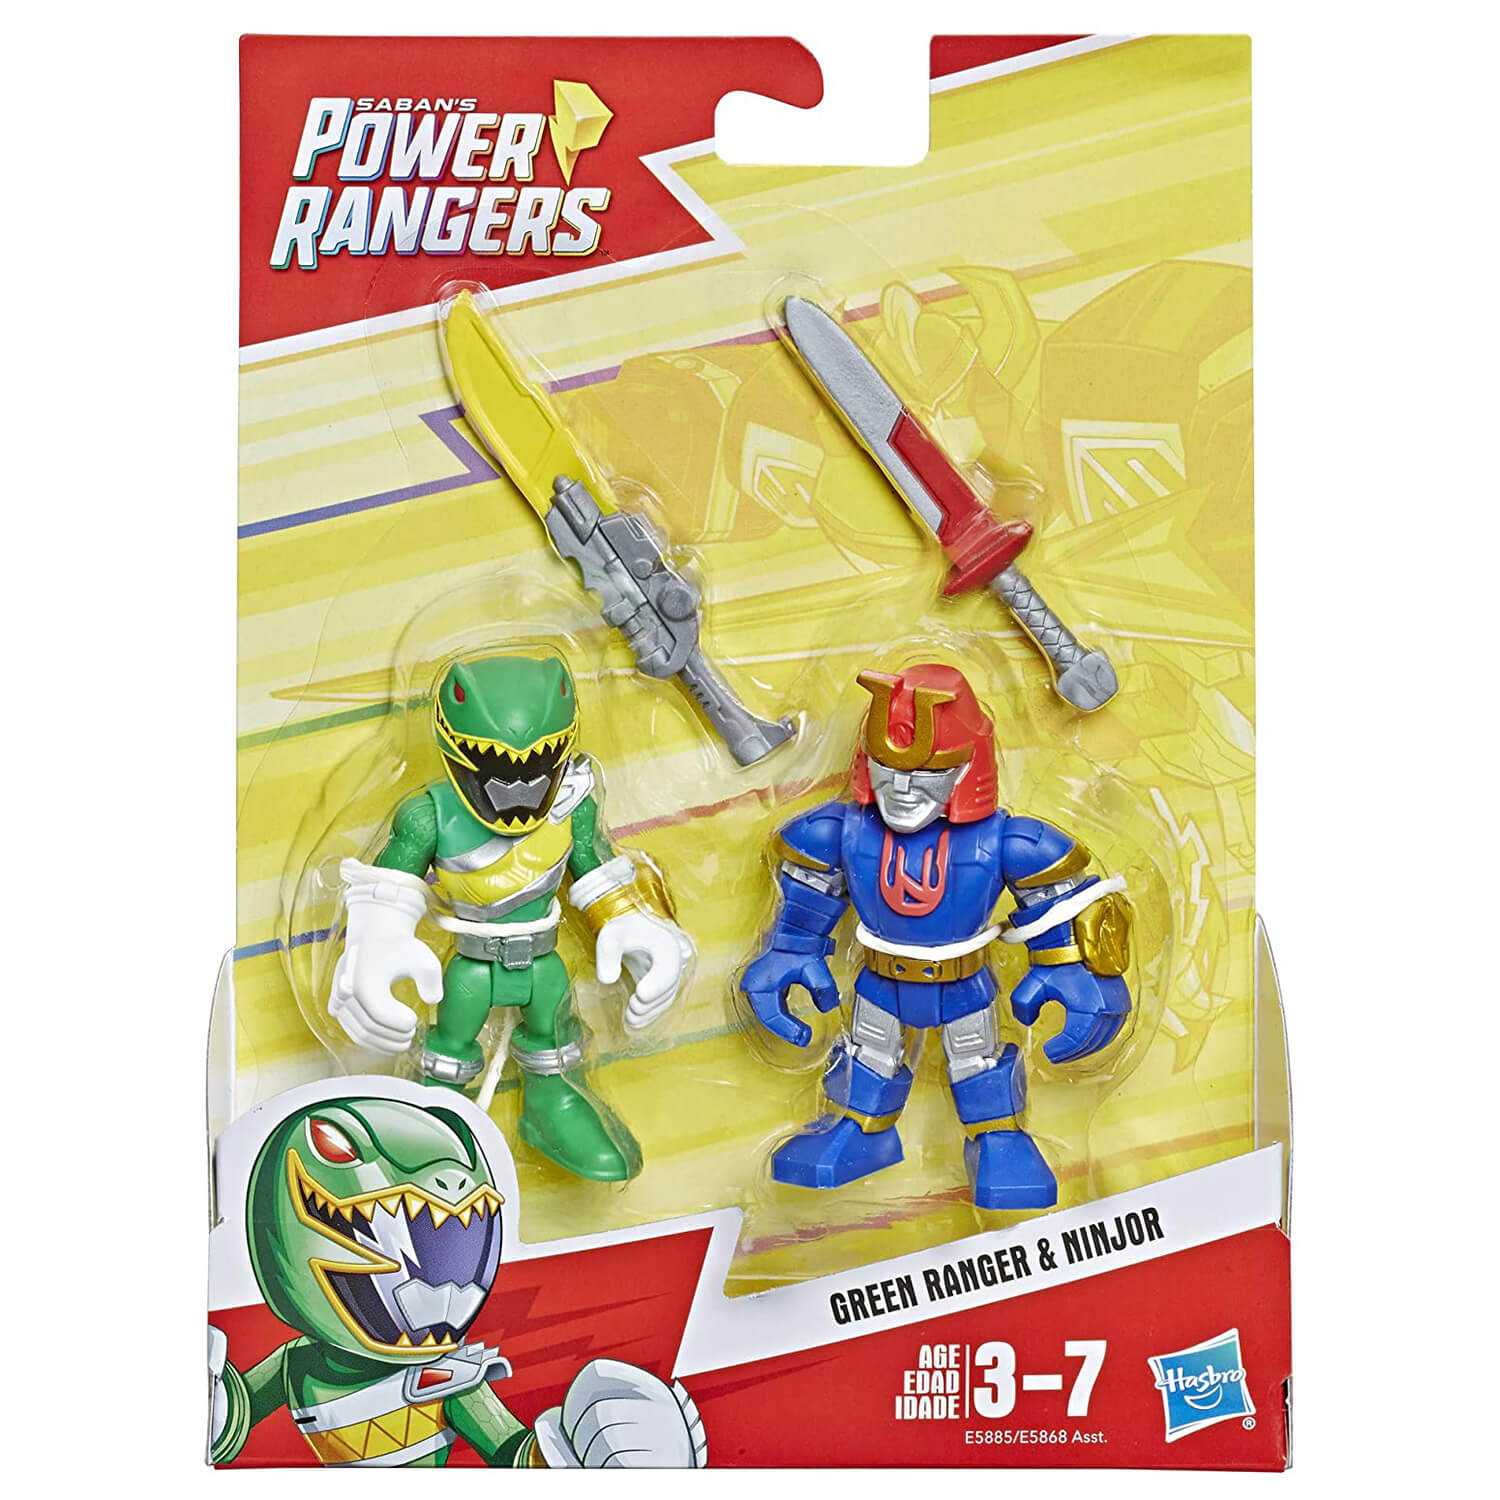 Front view of the Playskool Heroes Power Rangers Green Ranger & Minjor Action Figures package.